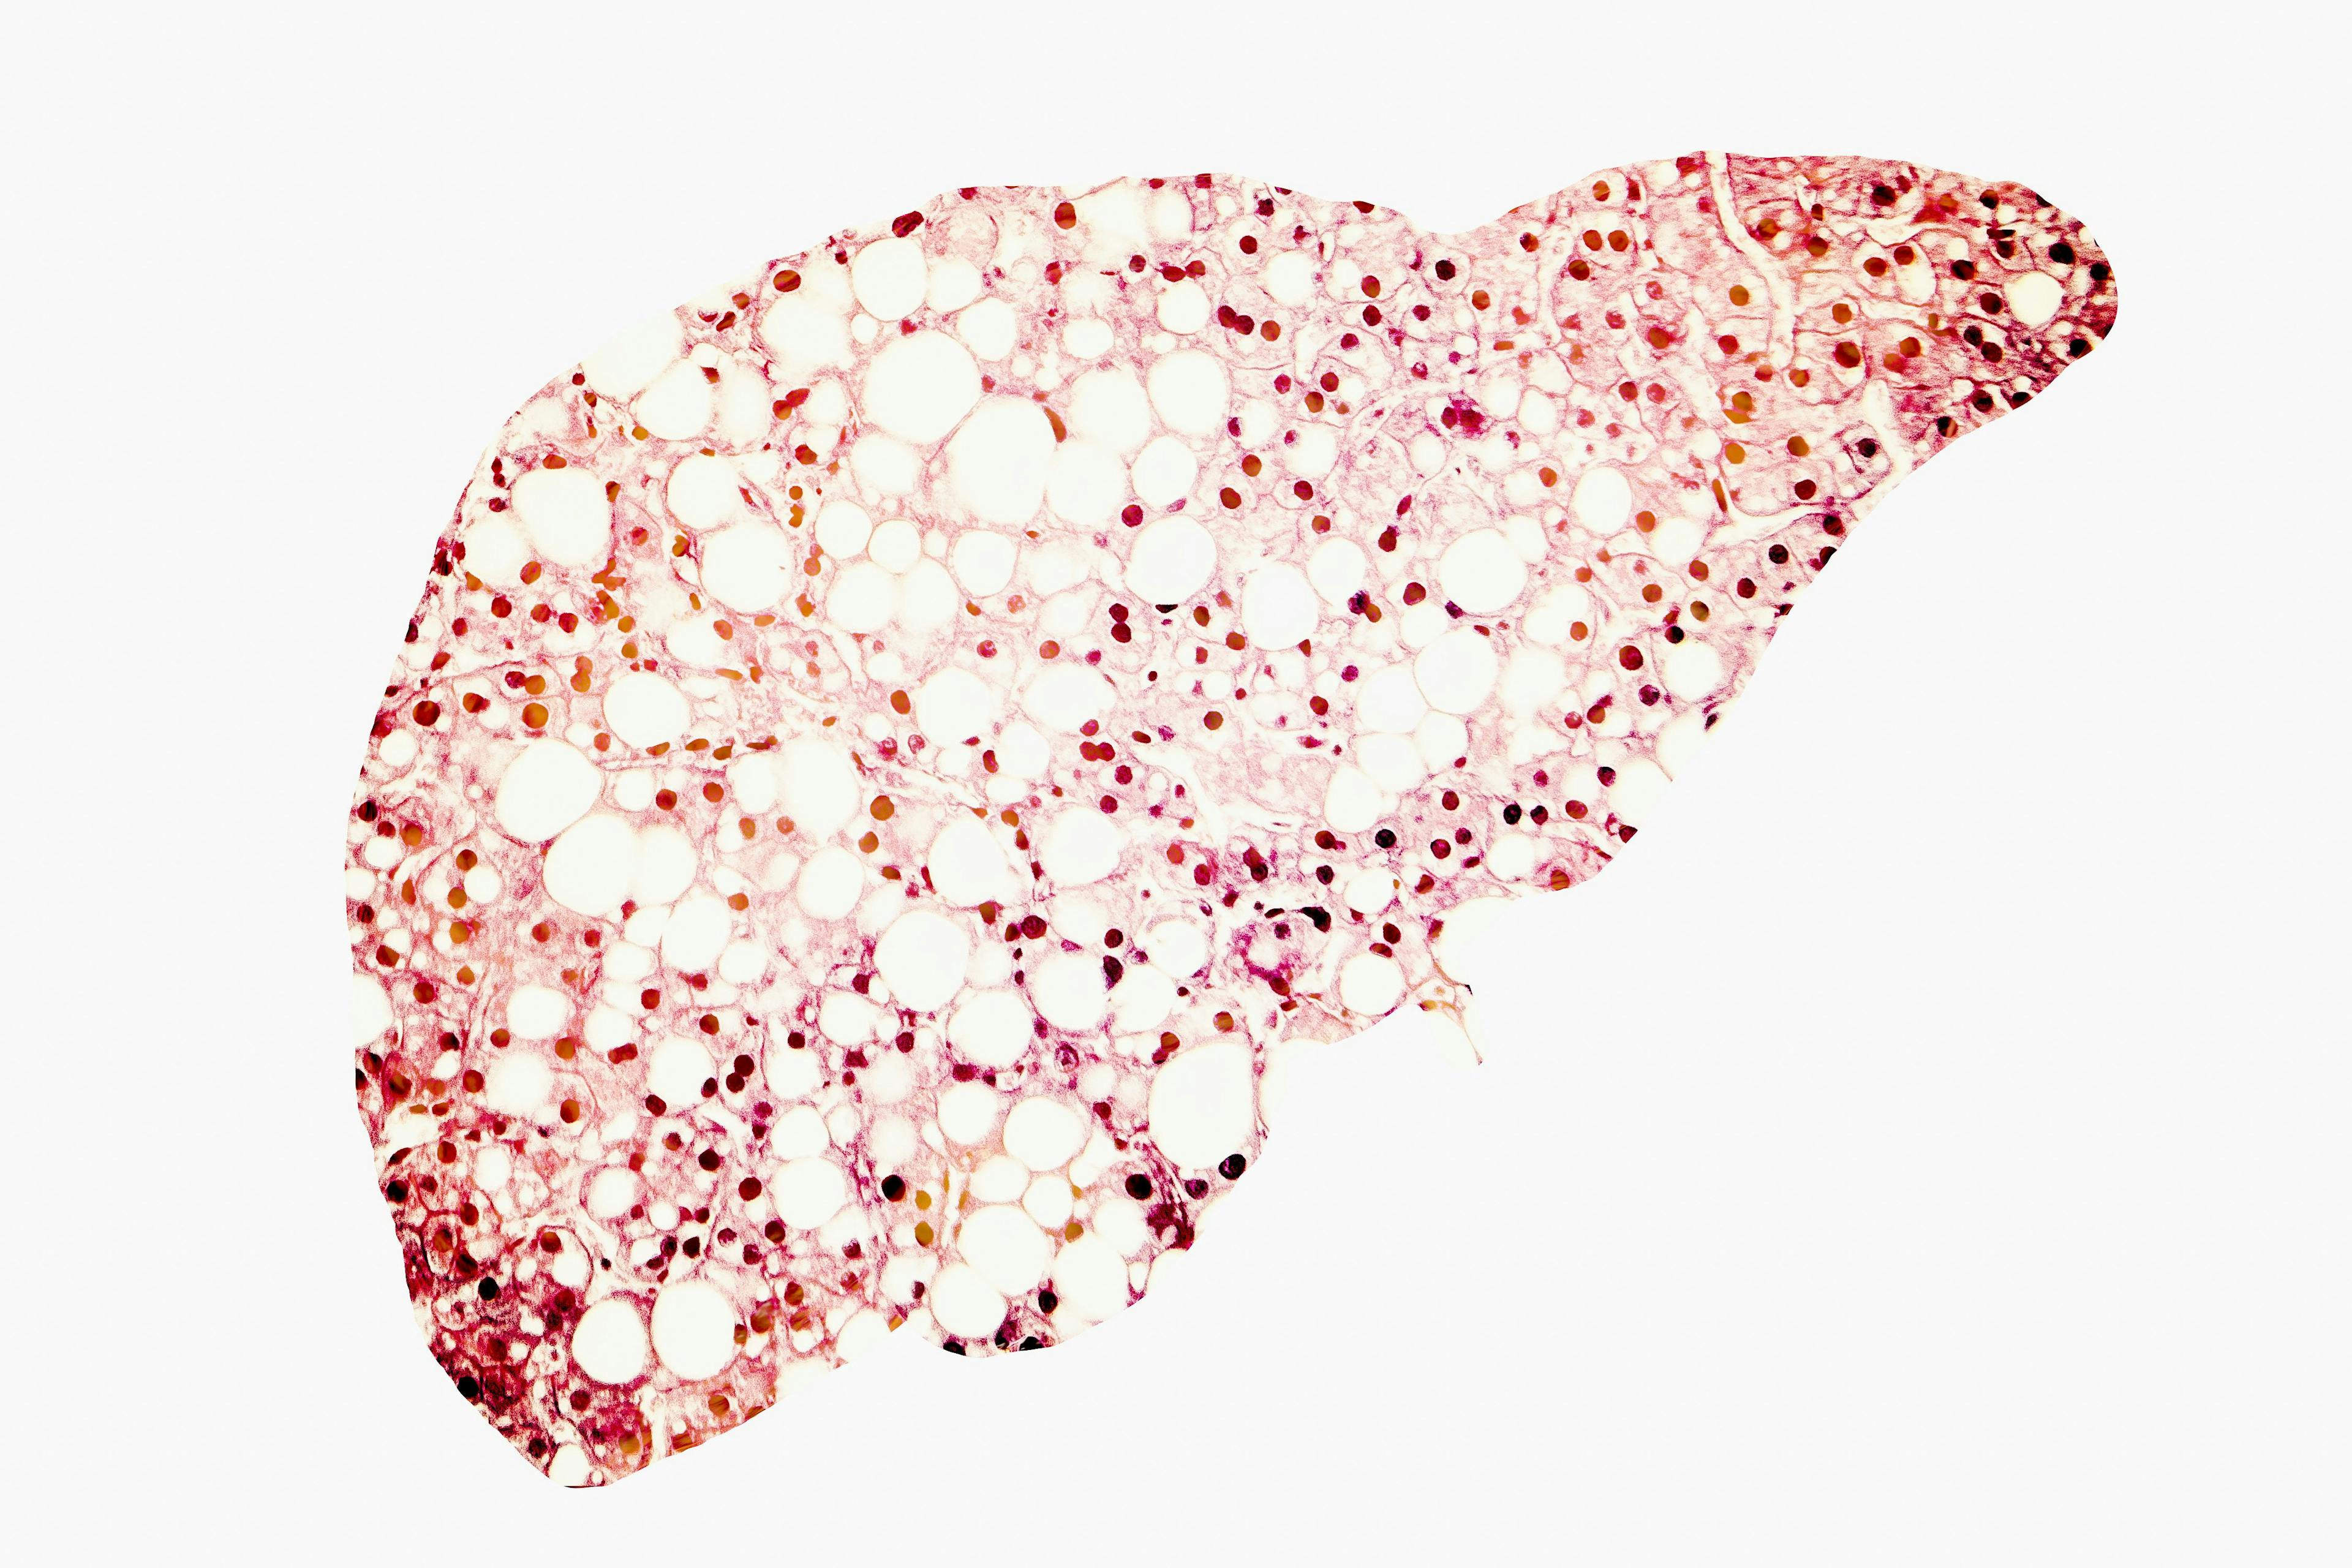 Patients with unresectable hepatocellular carcinoma experienced an improvement in several health-related quality of life measures following treatment with first-line tislelizumab compared with sorafenib. 